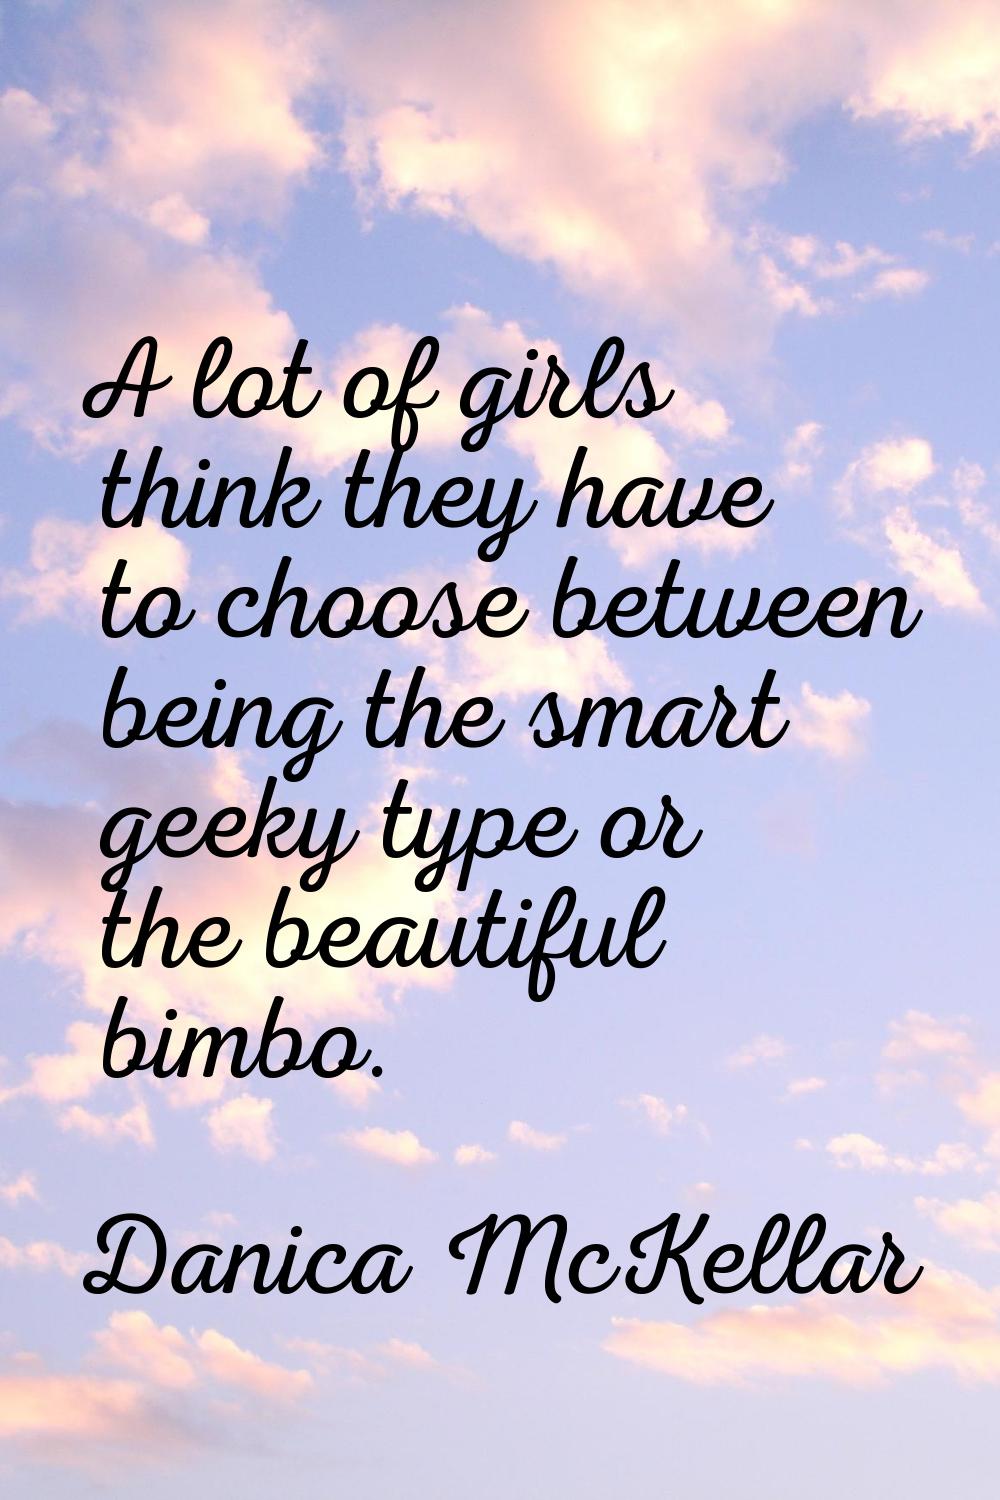 A lot of girls think they have to choose between being the smart geeky type or the beautiful bimbo.